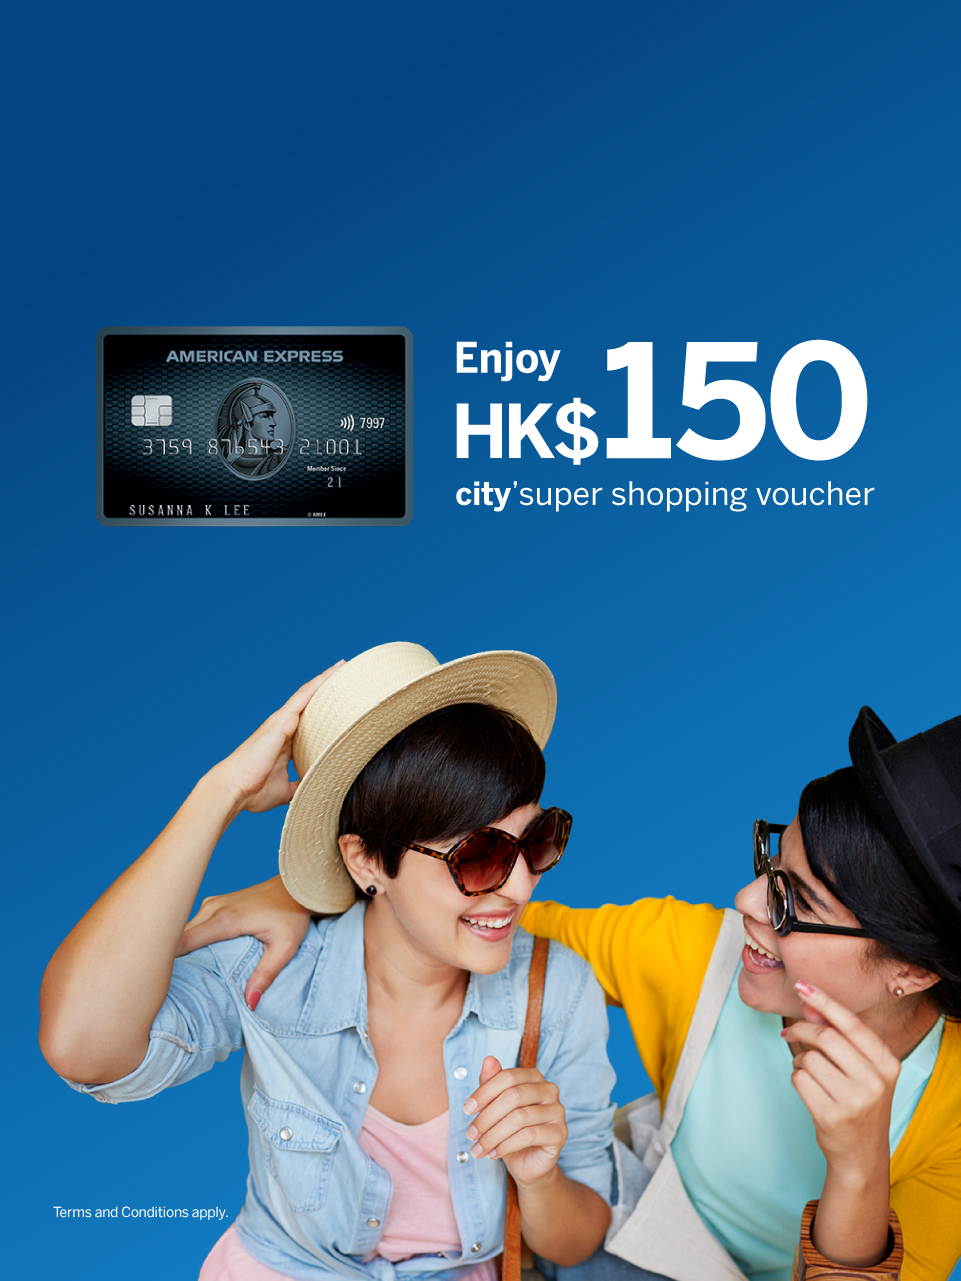 American Express Explorer® Credit Card and Times Square Promotion